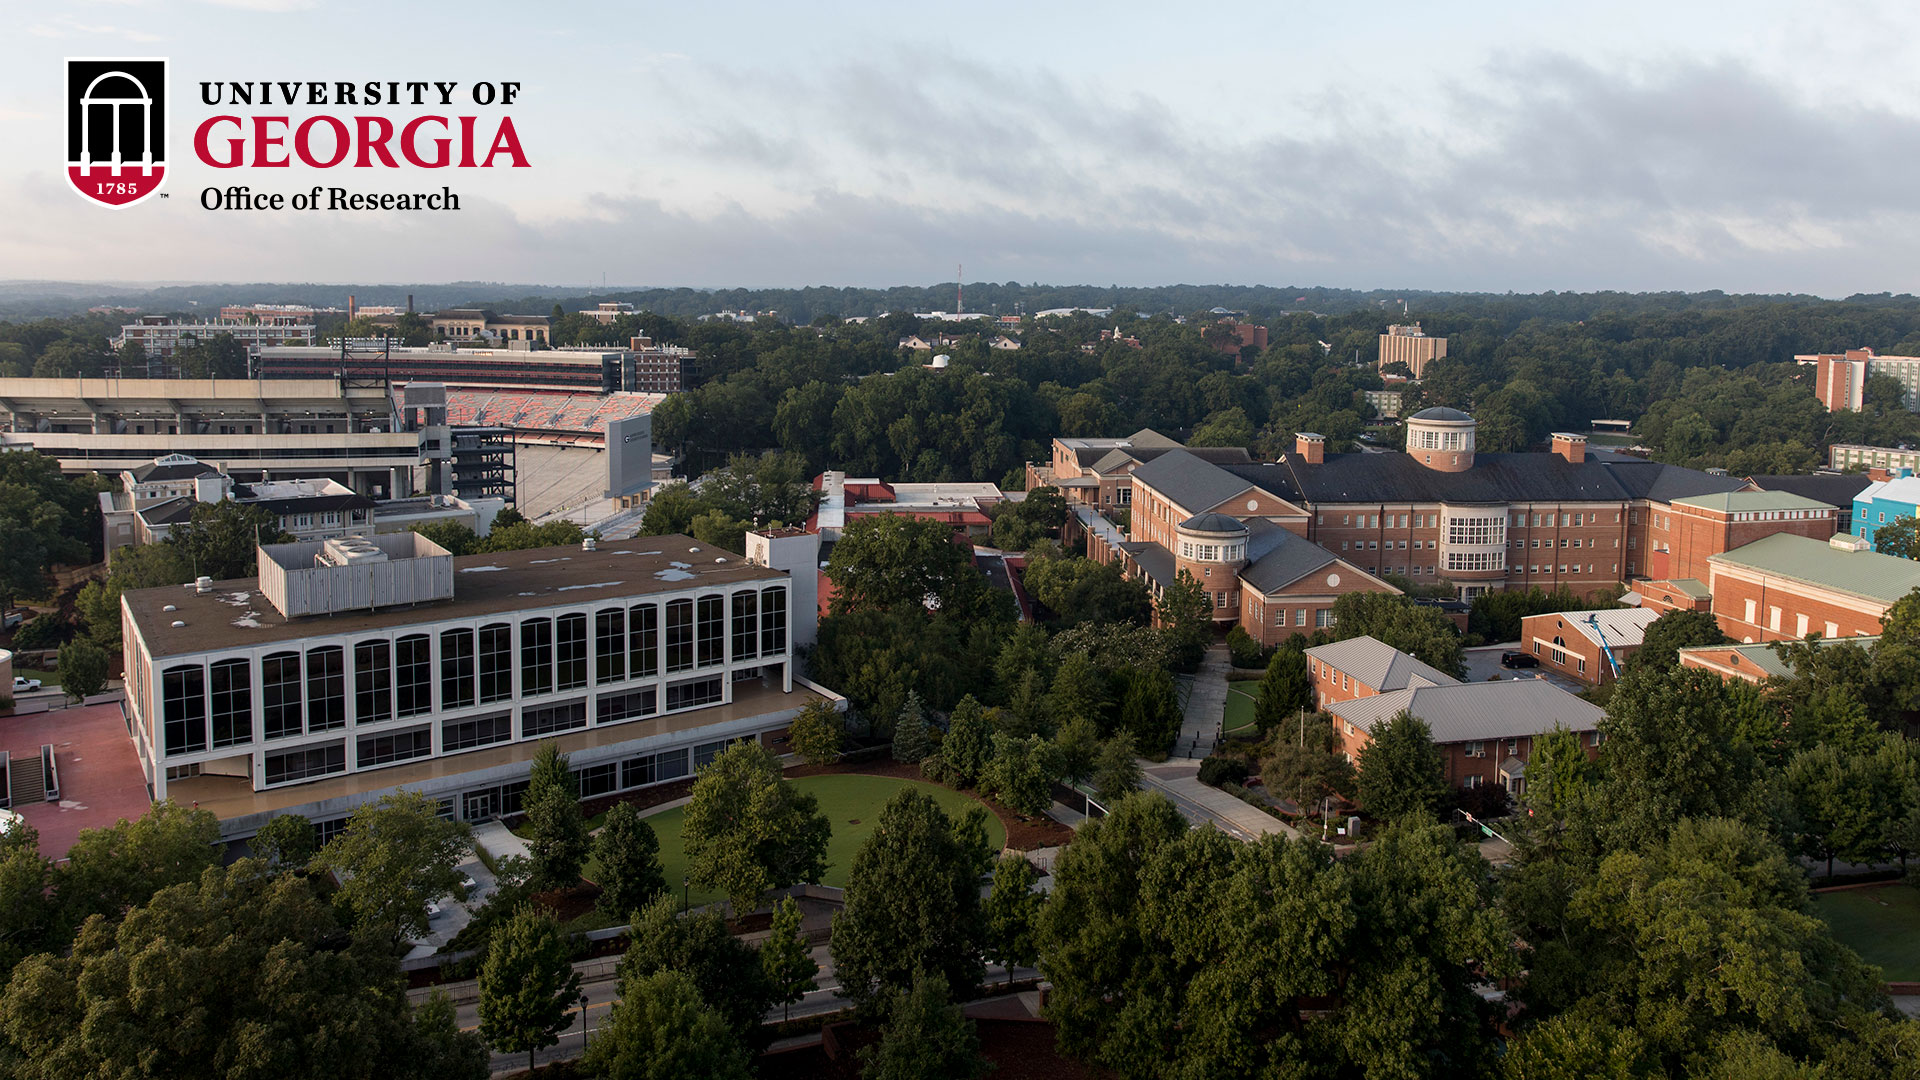 University of Georgia aerial campus photo with Office of Research logo